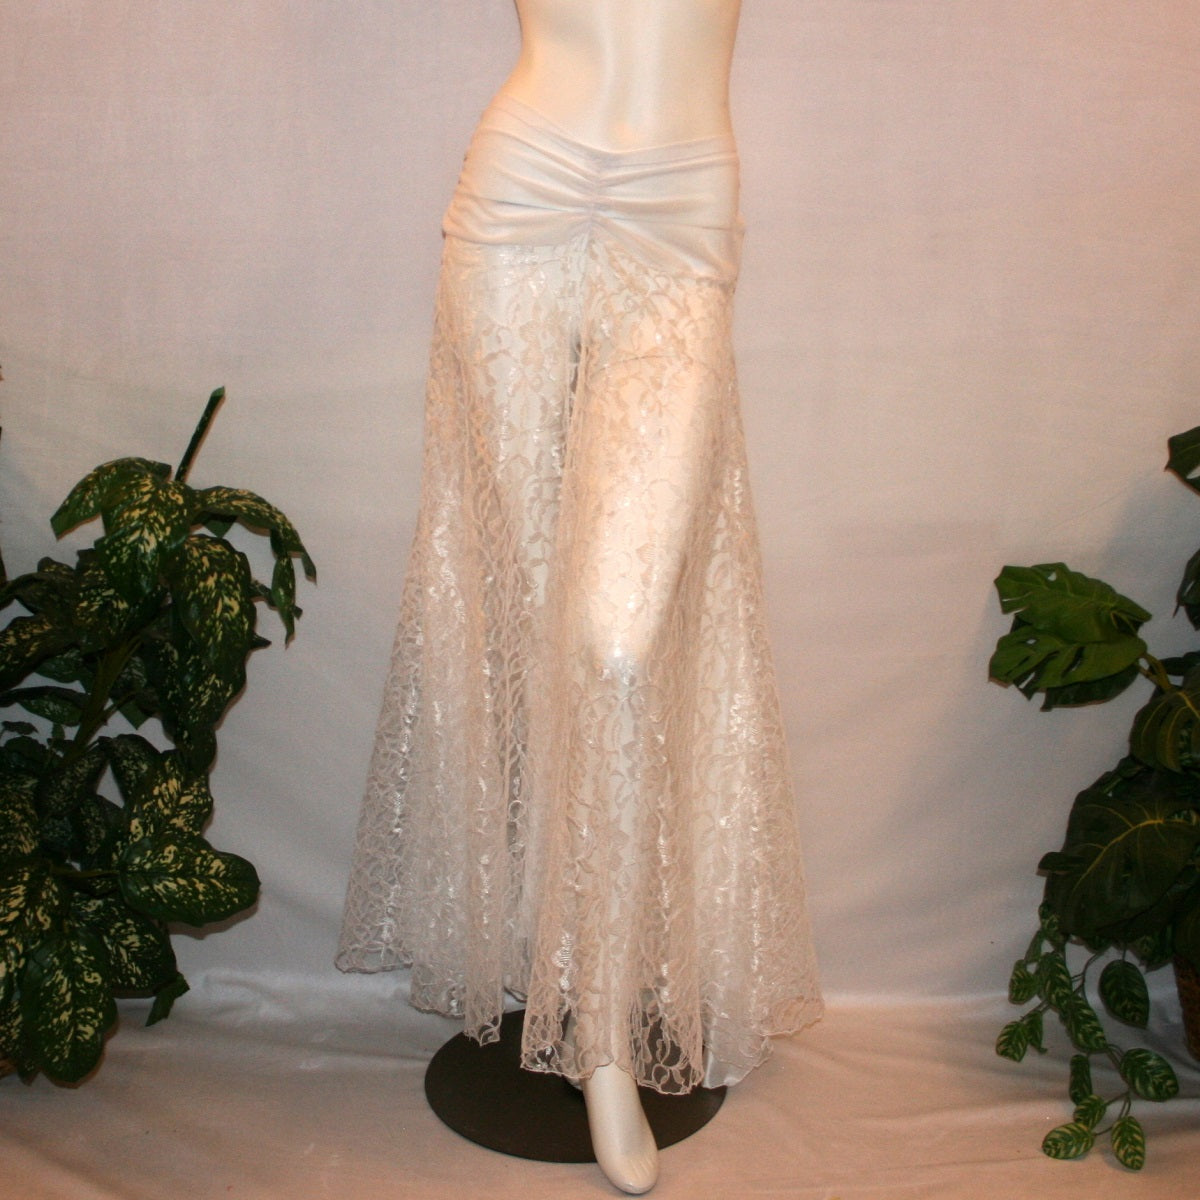 White ballroom skirt created of yards of white lace with a white sheer stretch mesh ruched hip band, has inset panels & floats of white stretch satin.